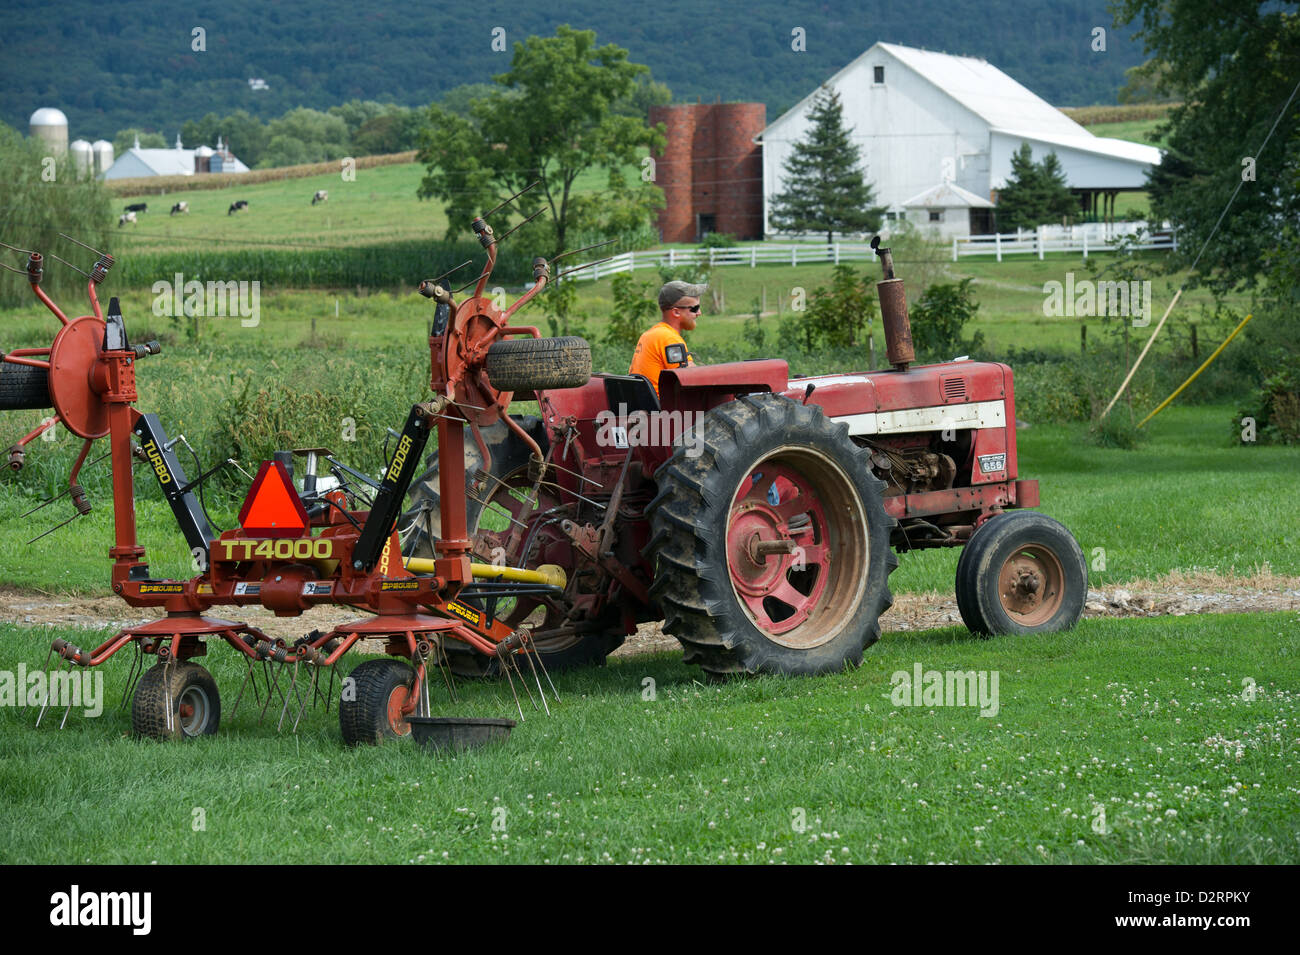 Man operating an antique tractor on a farm Stock Photo